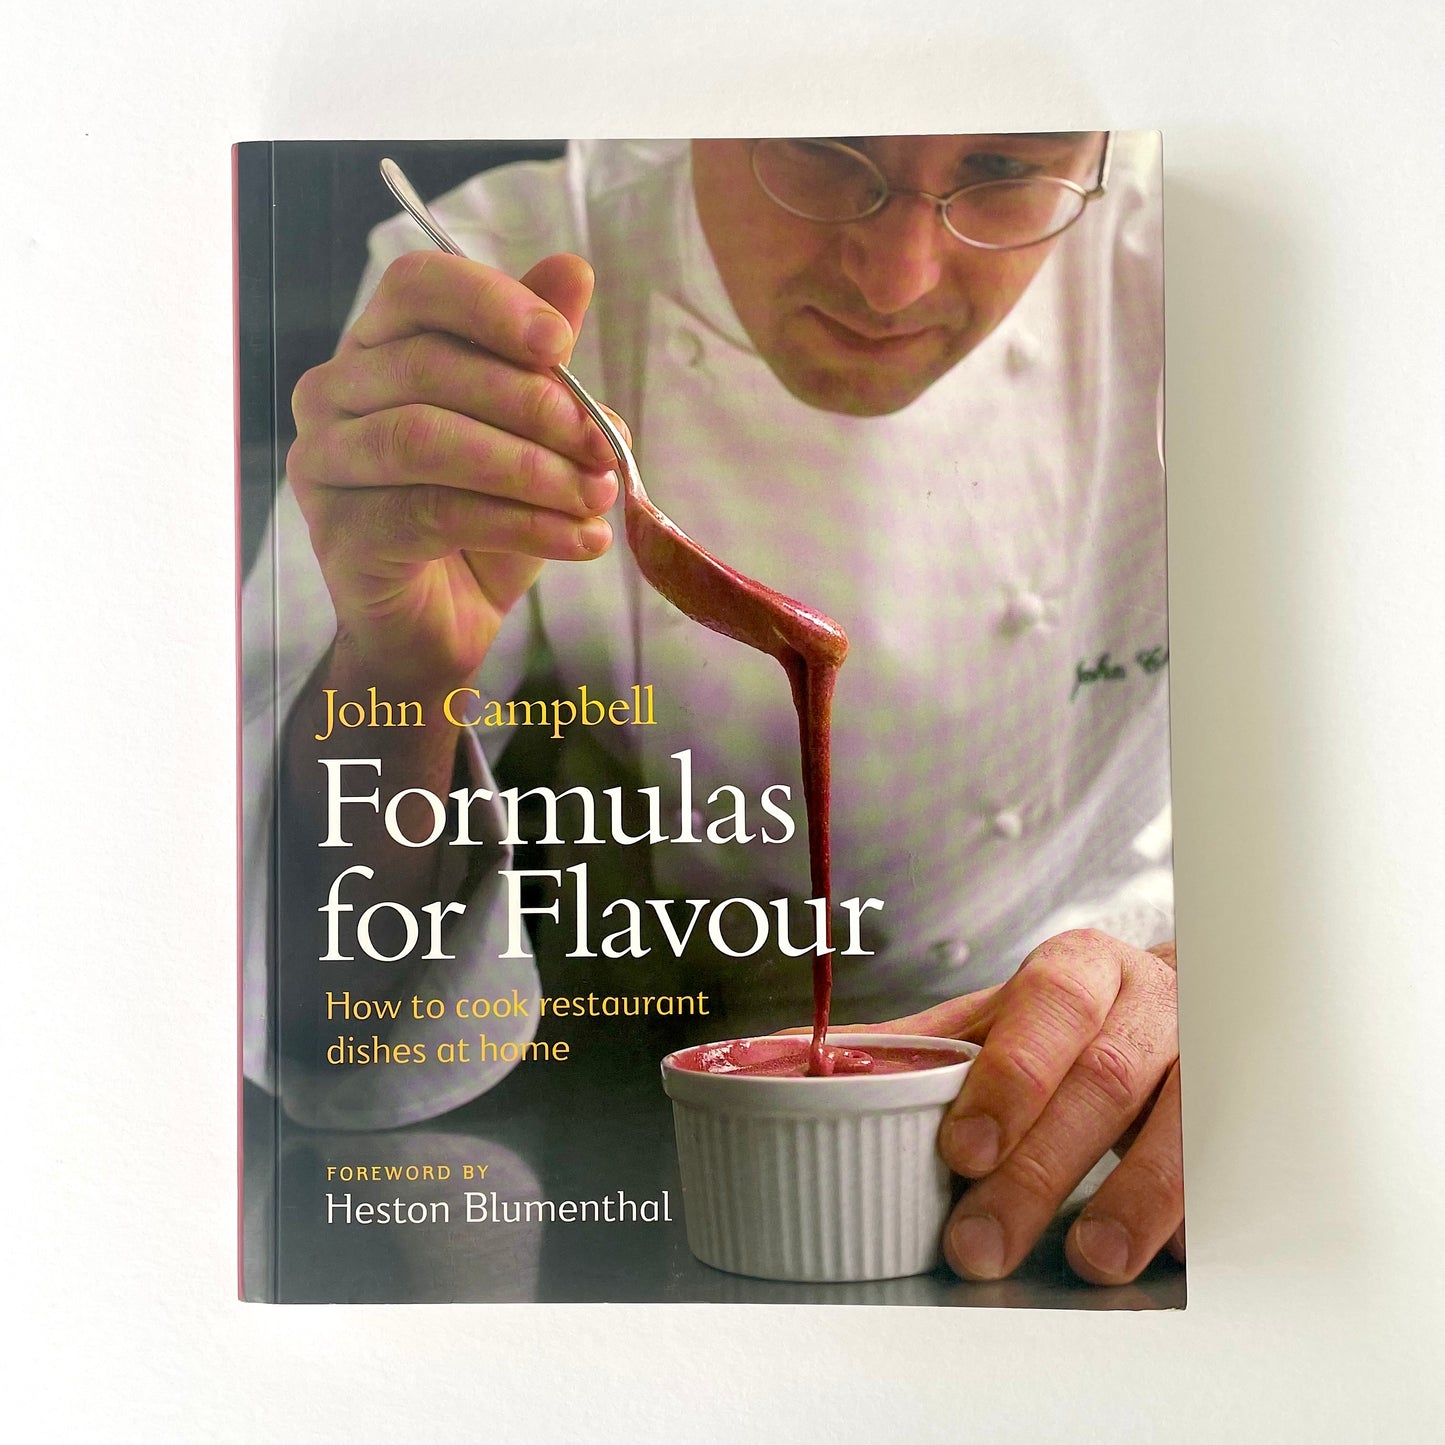 Formulas for Flavor by John Campbell